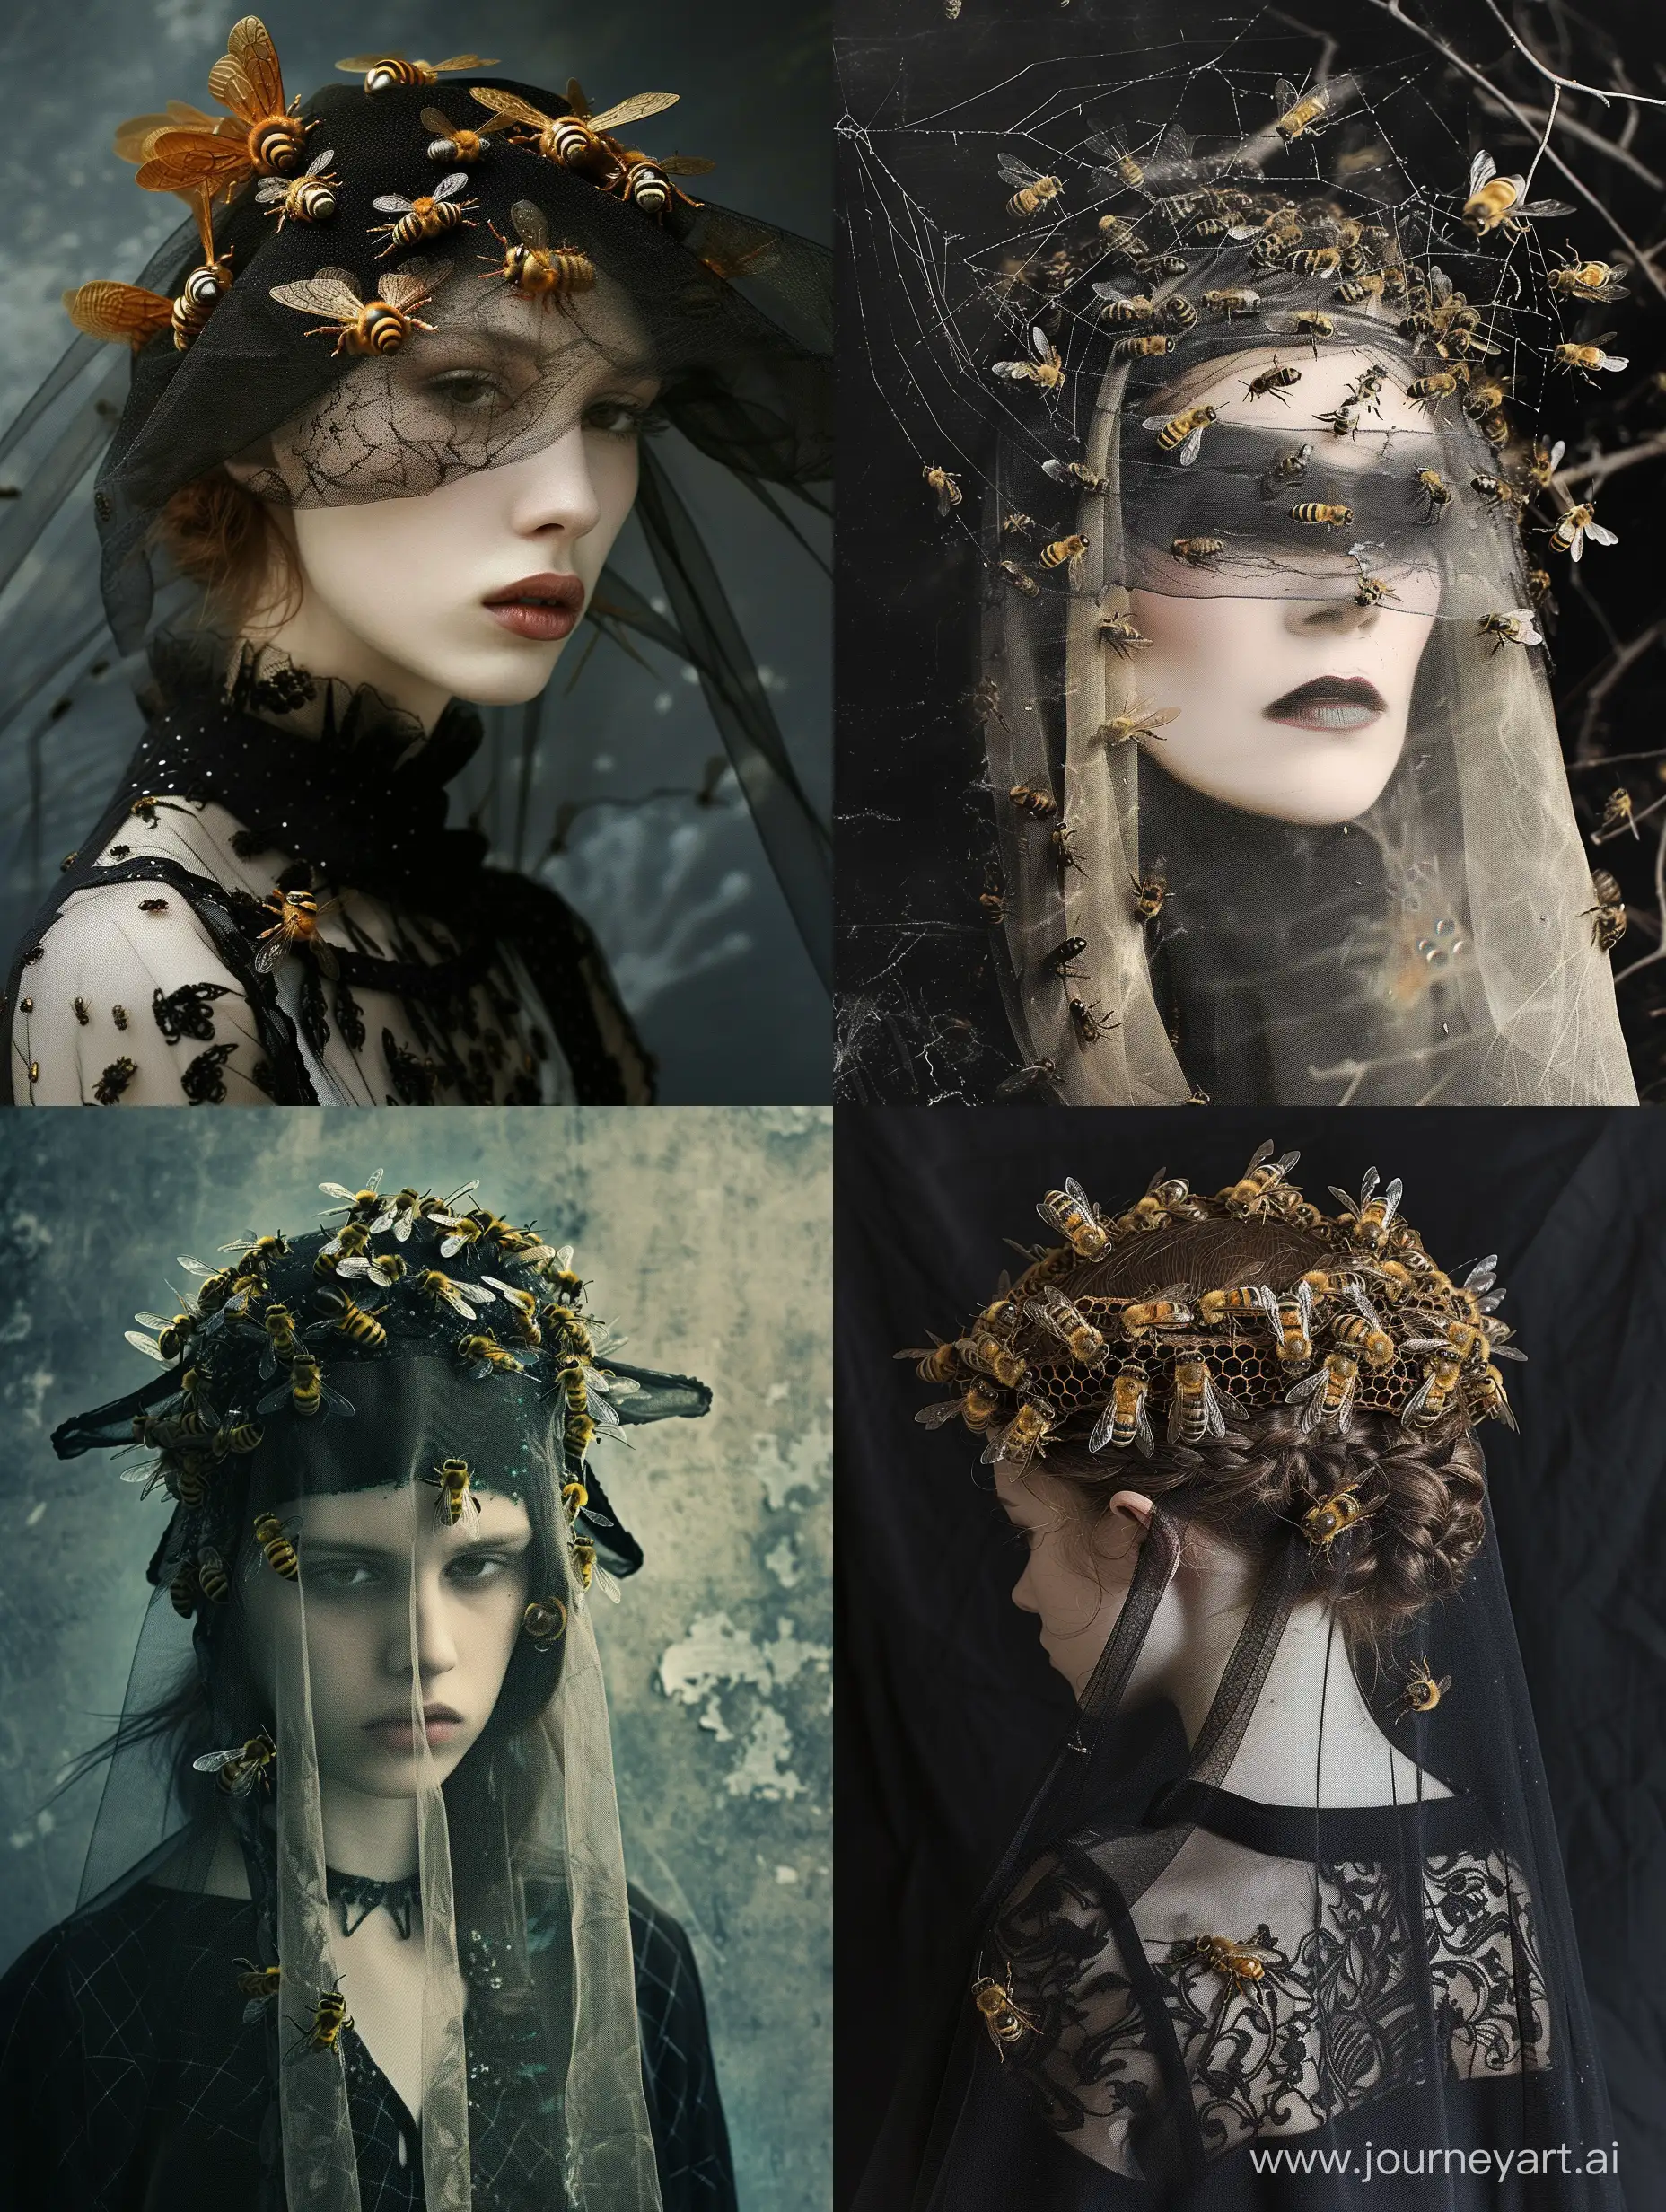 a woman wearing a veil with bees on it, an album cover by Christian W. Staudinger, behance contest winner, gothic art, demonic photograph, made of insects, macabre